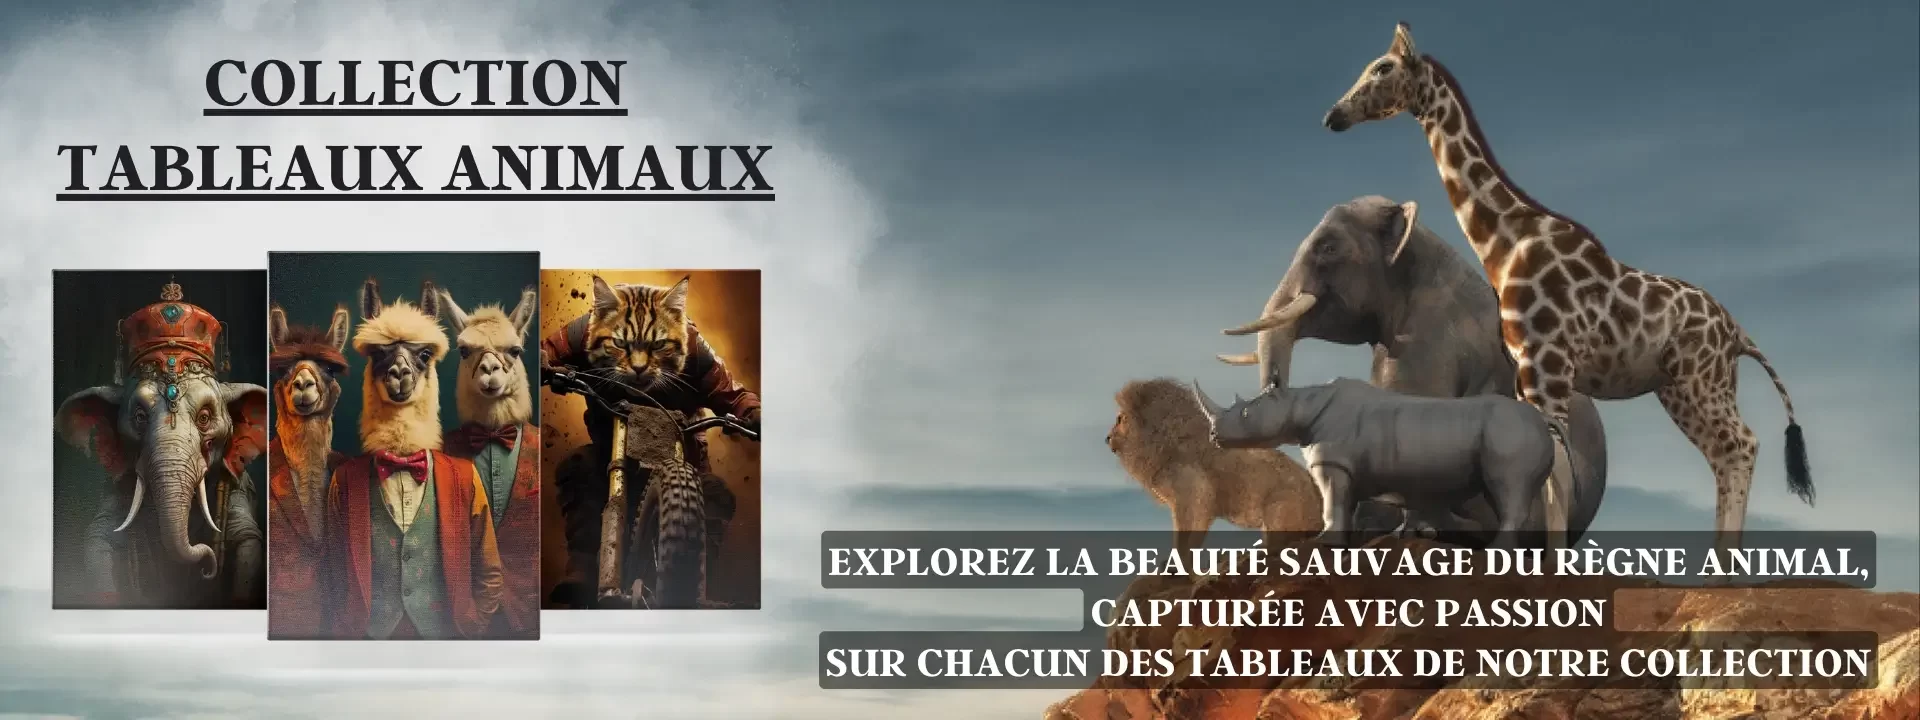 Tableau Animaux